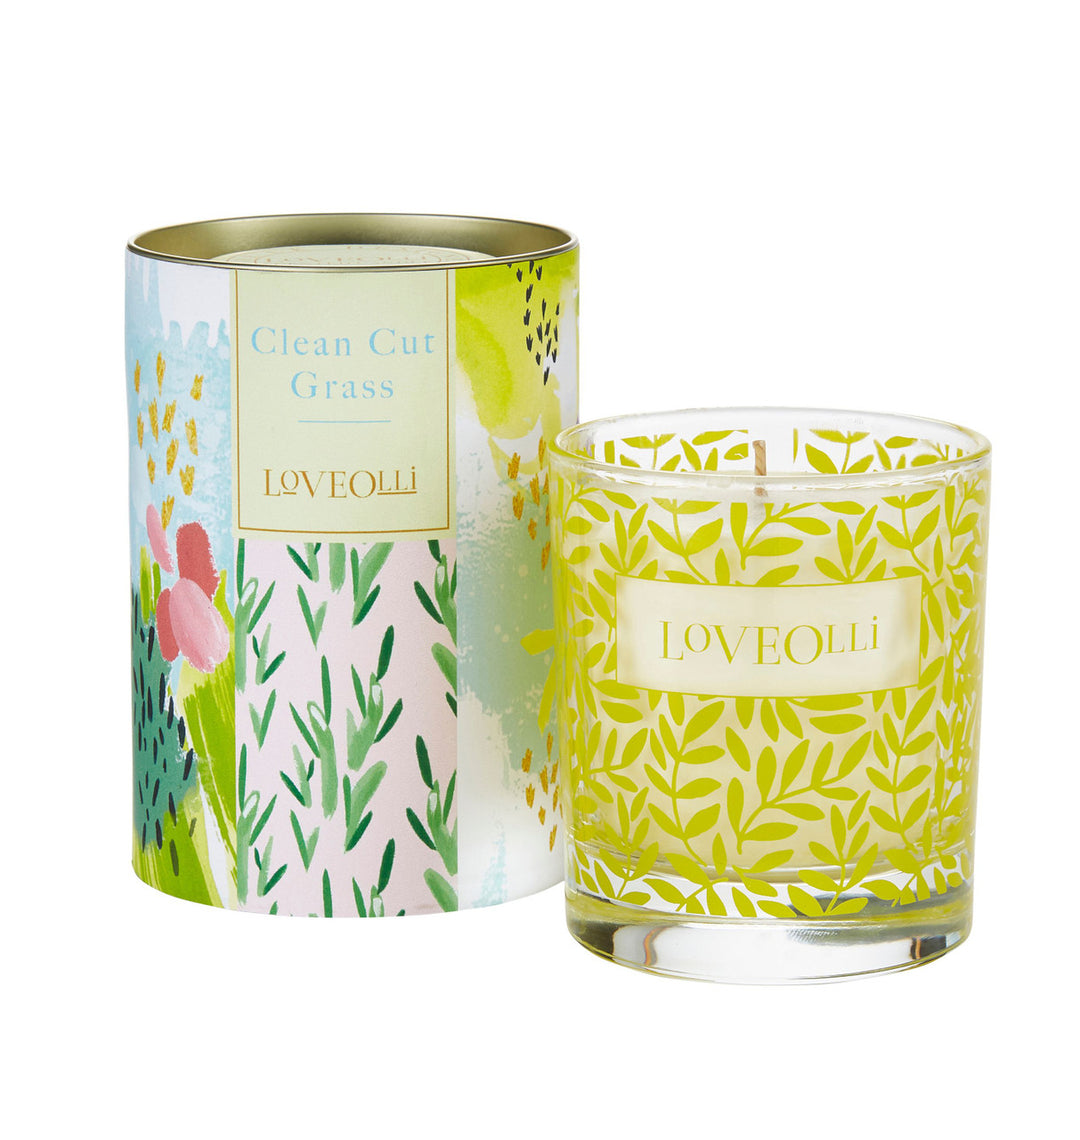 Love Olli Clean Cut Grass scented candle in glass. Hand poured in the UK.